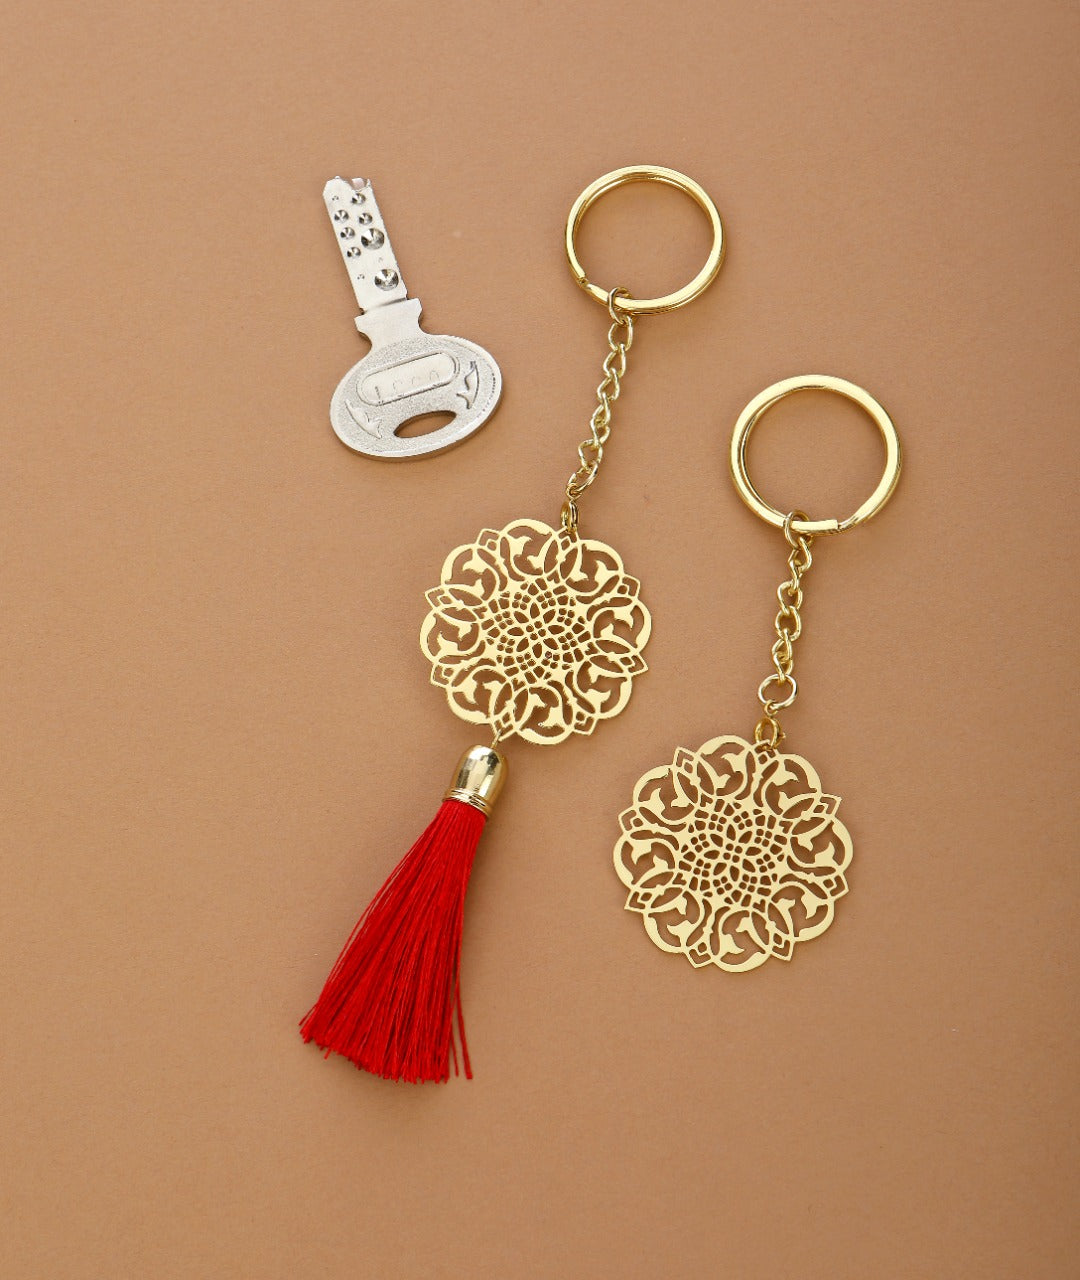 ADORAA's Jaali design Rakhi for bhabi with red hanging tassel cum keychain ring crafted in brass with golden finish